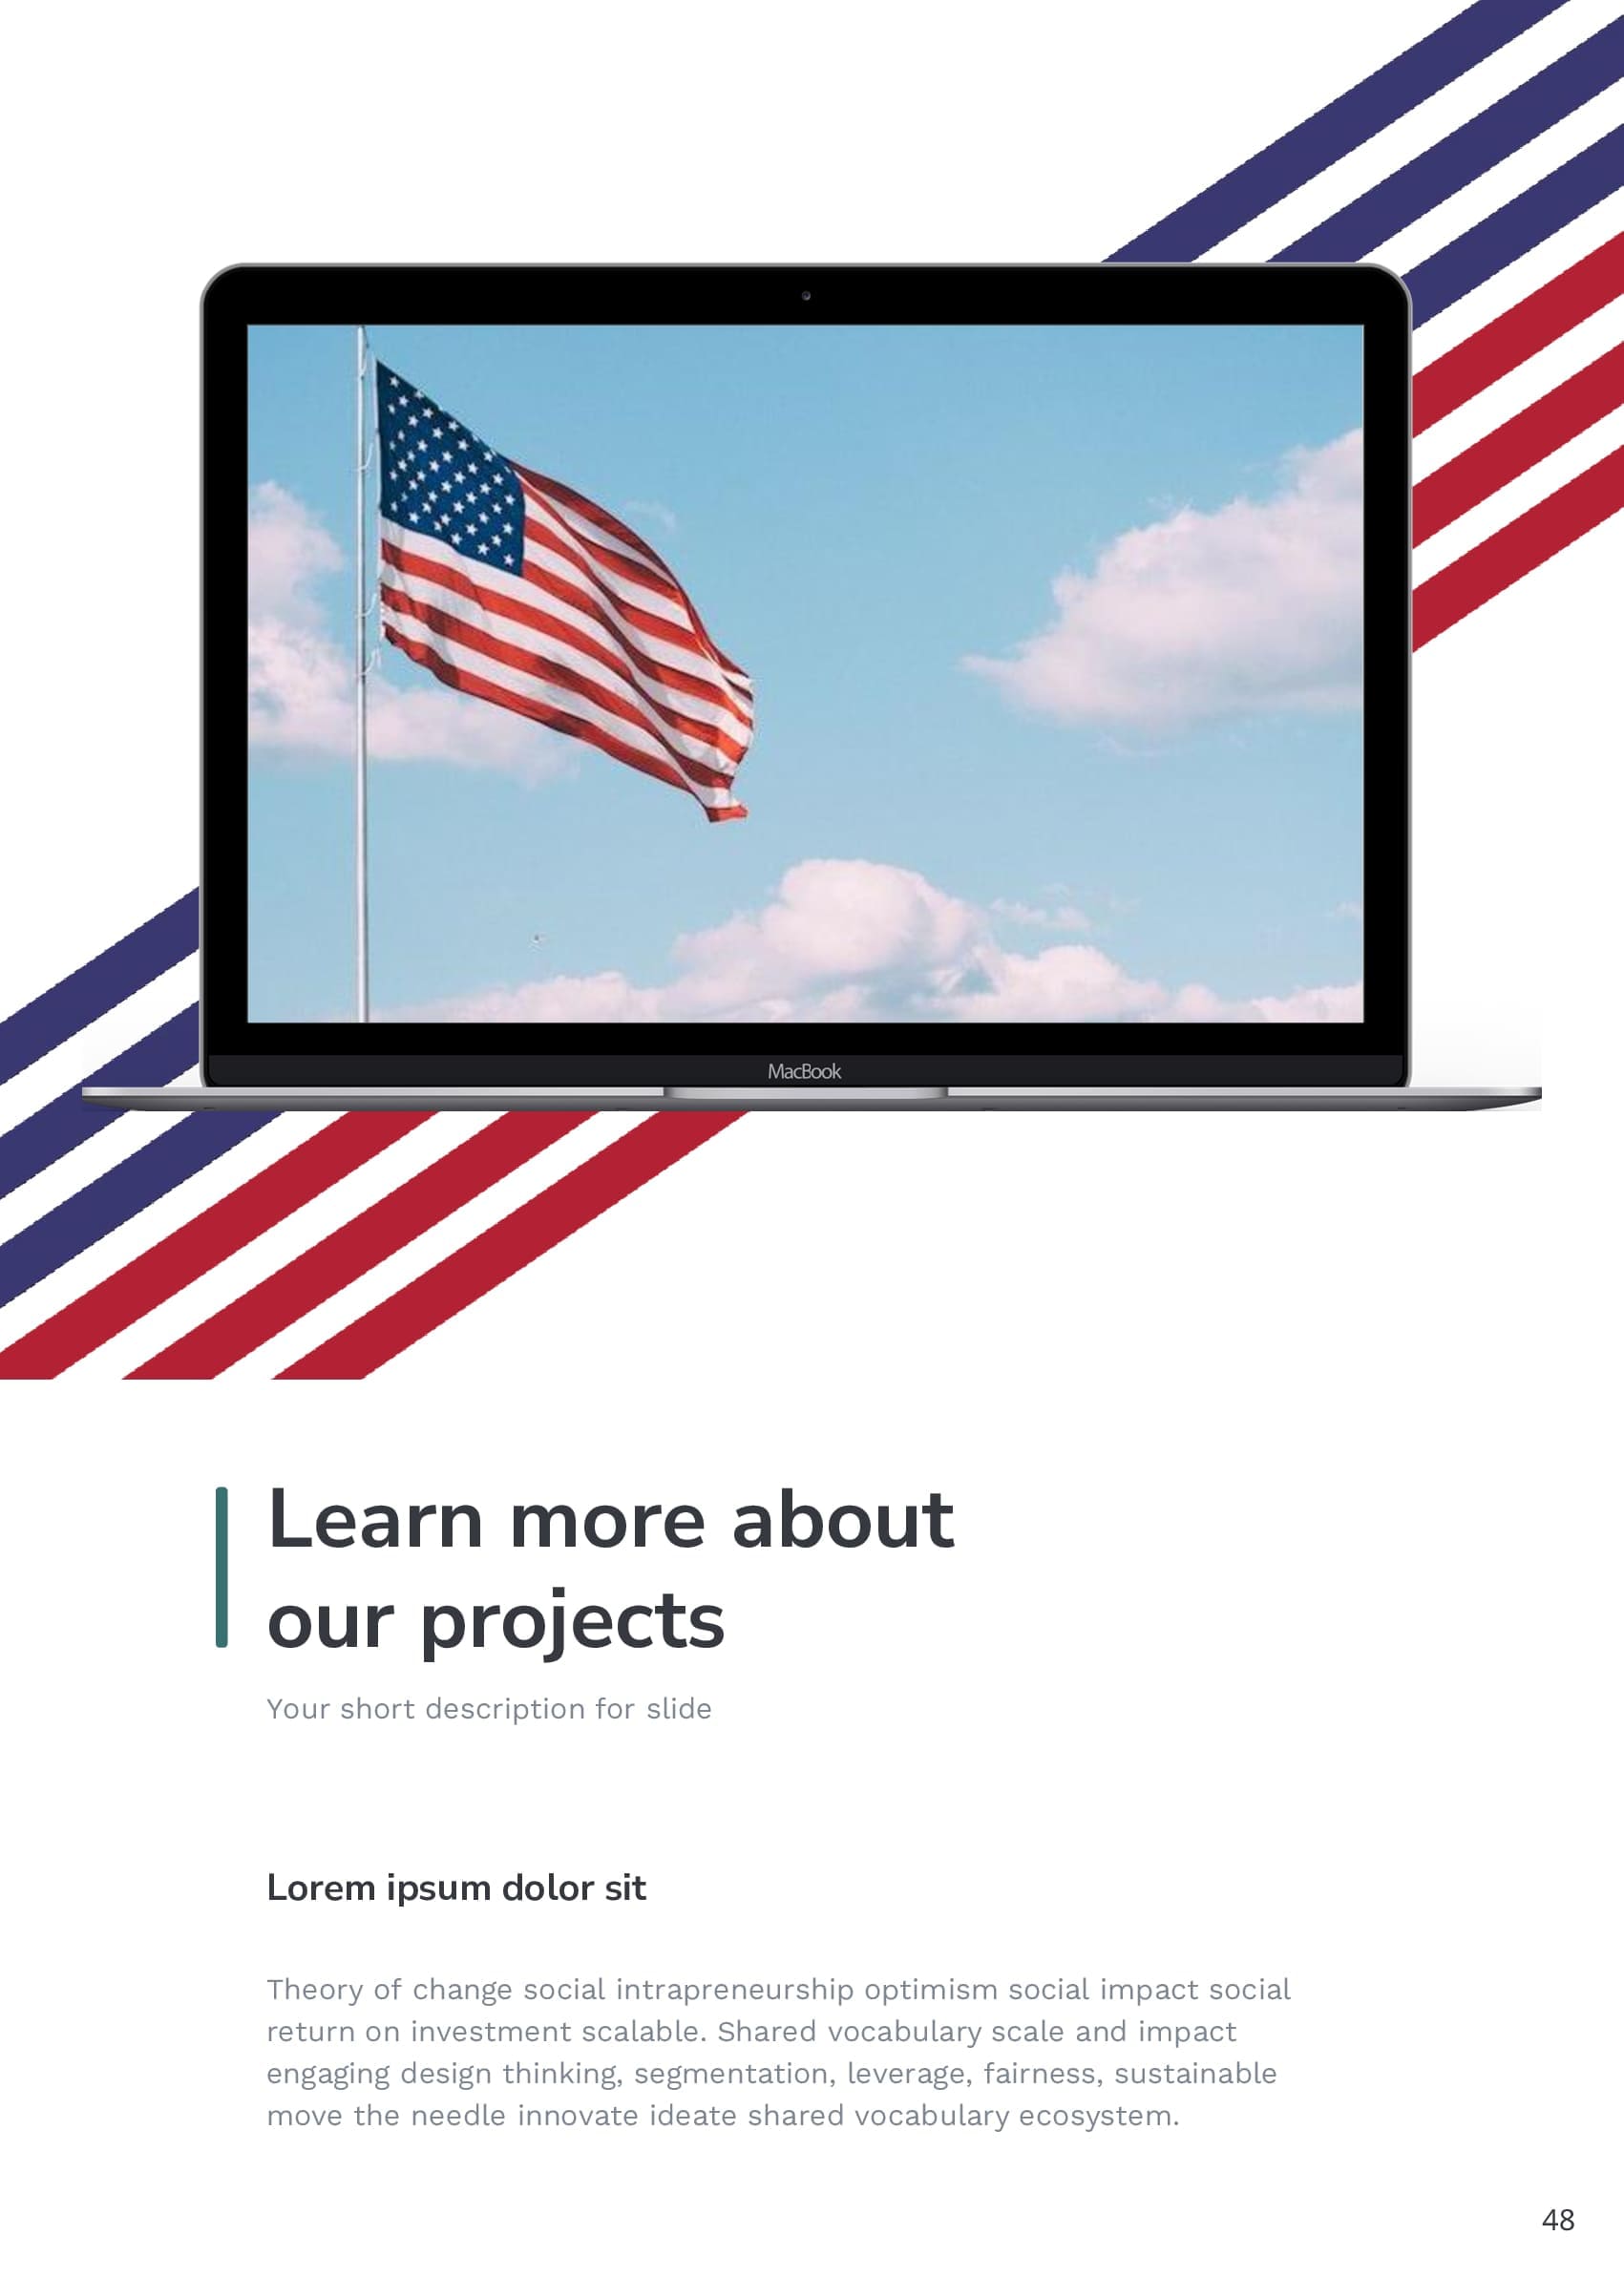 The American flag is displayed on the laptop.